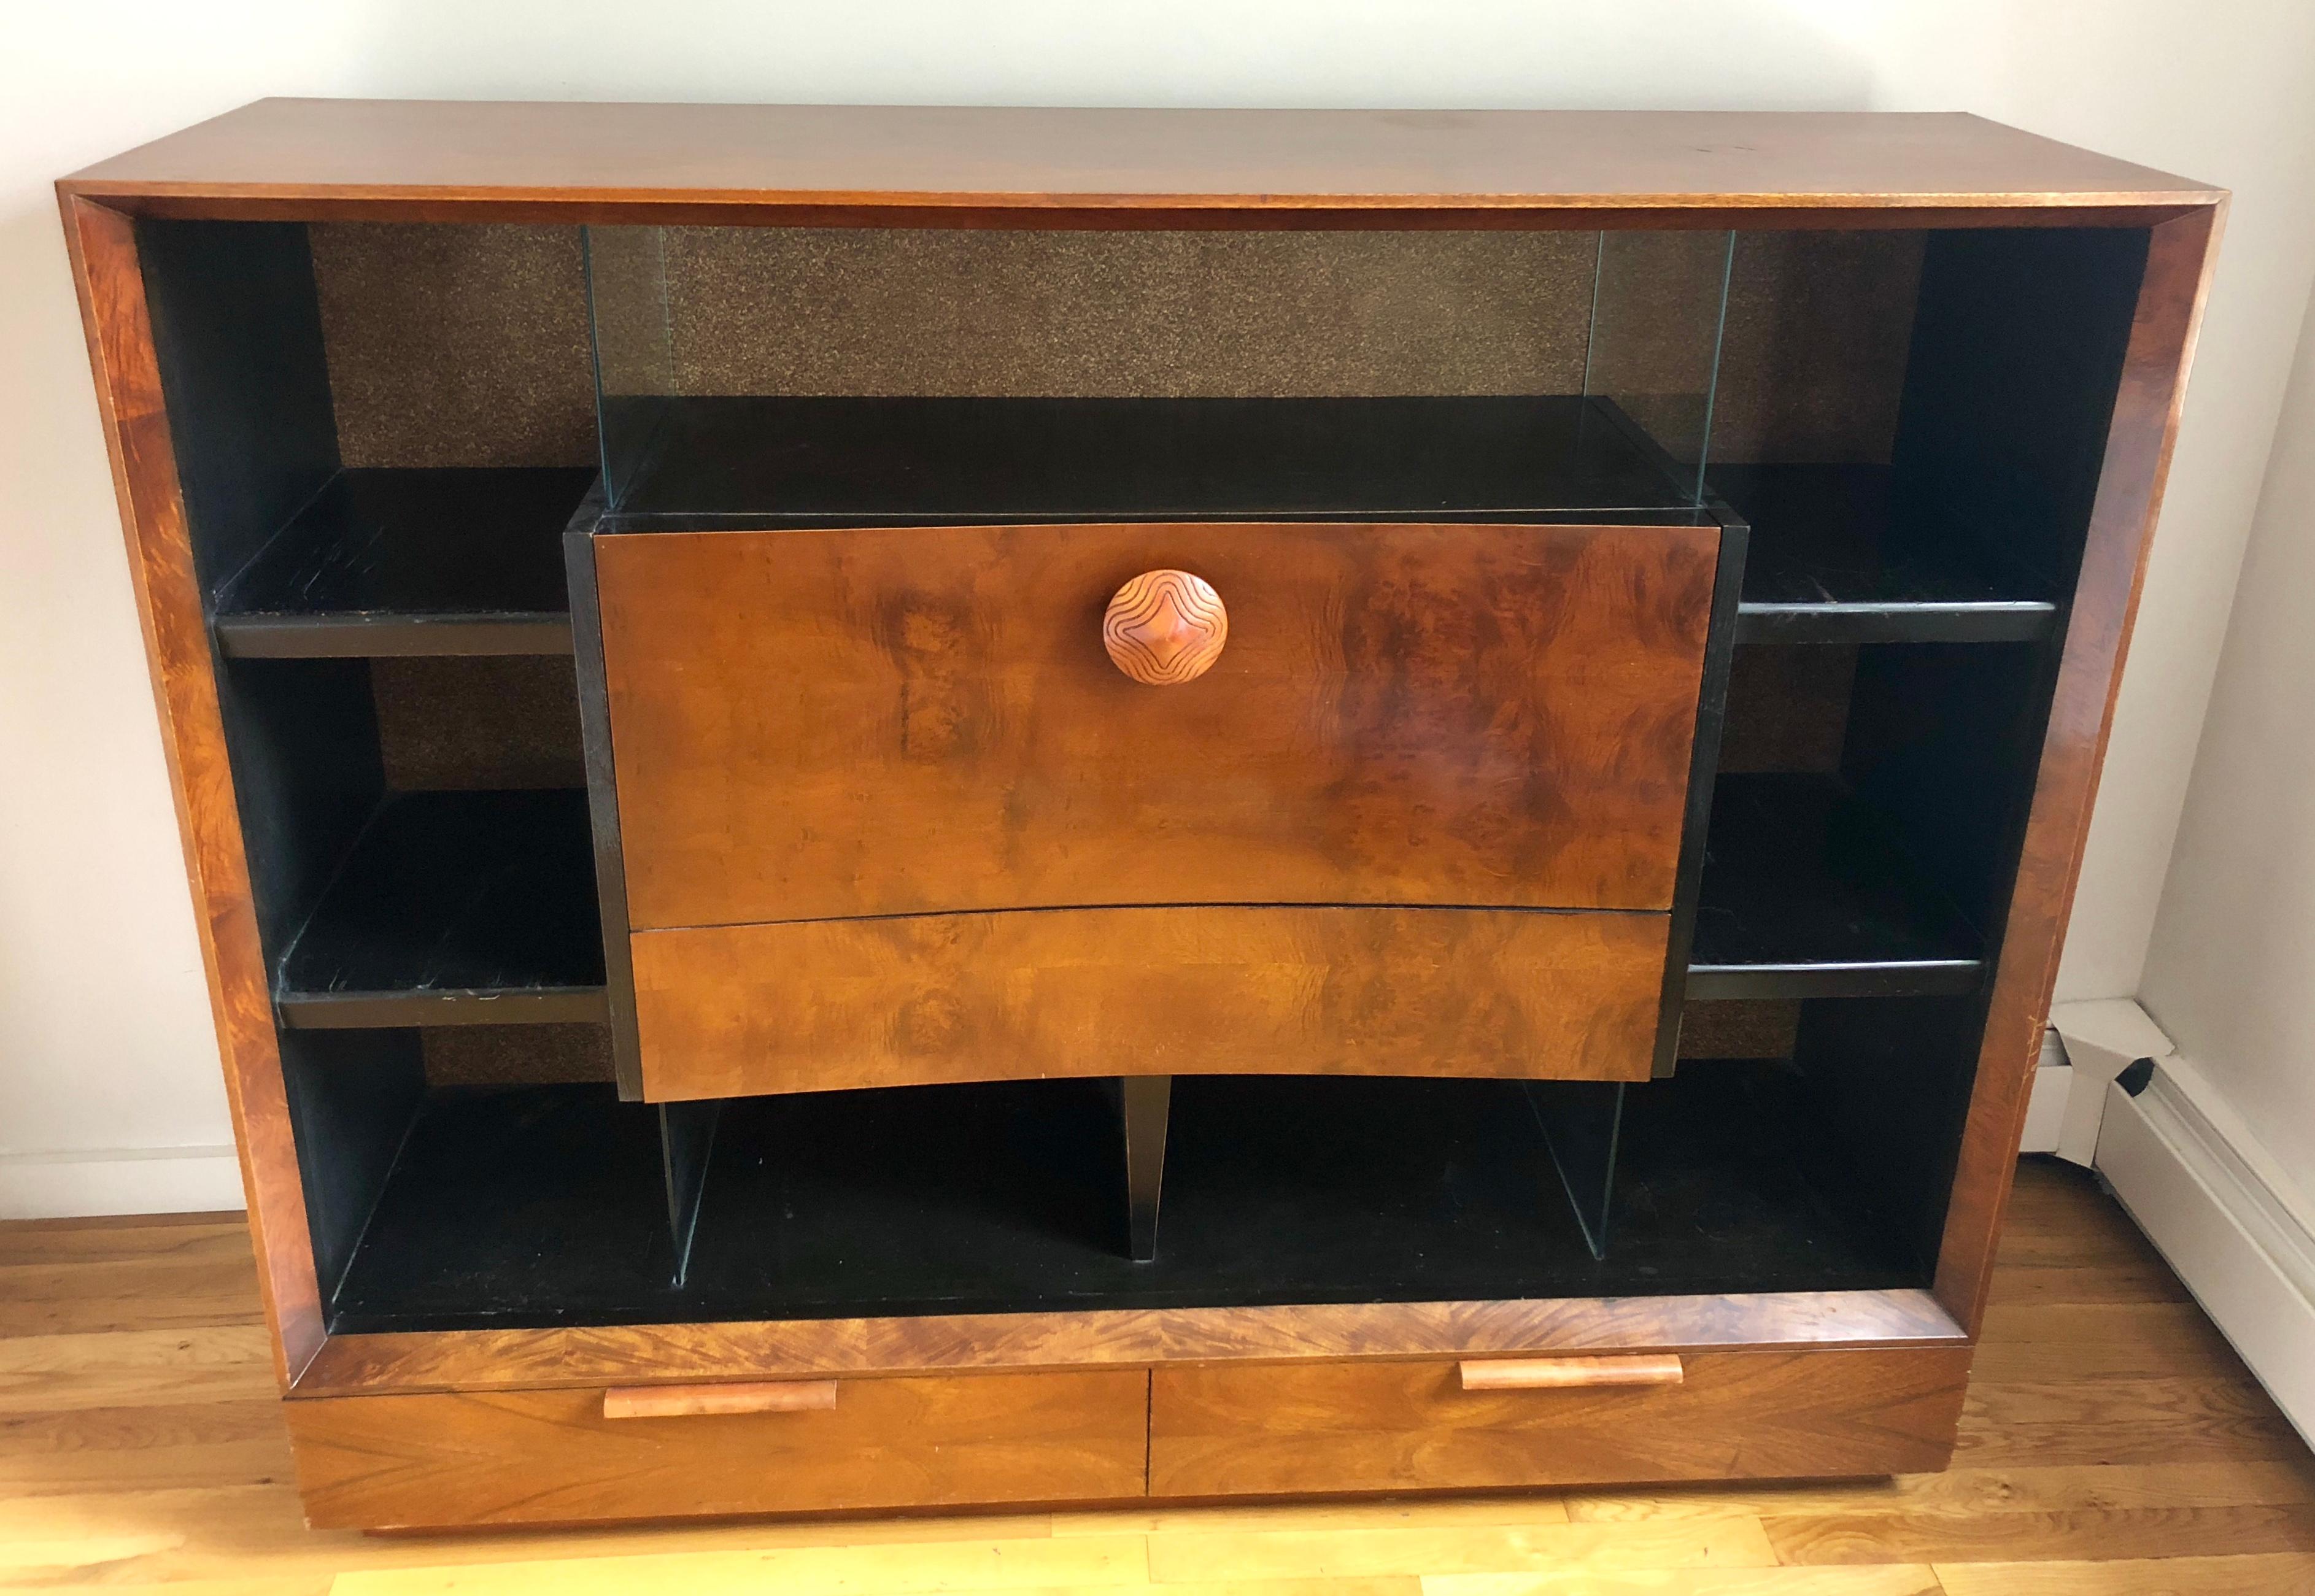 Bookcase with drop-front secretary desk and storage drawers in paldao wood. Glass dividers separate storage compartments, and cork-lined back. Retains Herman Miller tag. Great original condition.